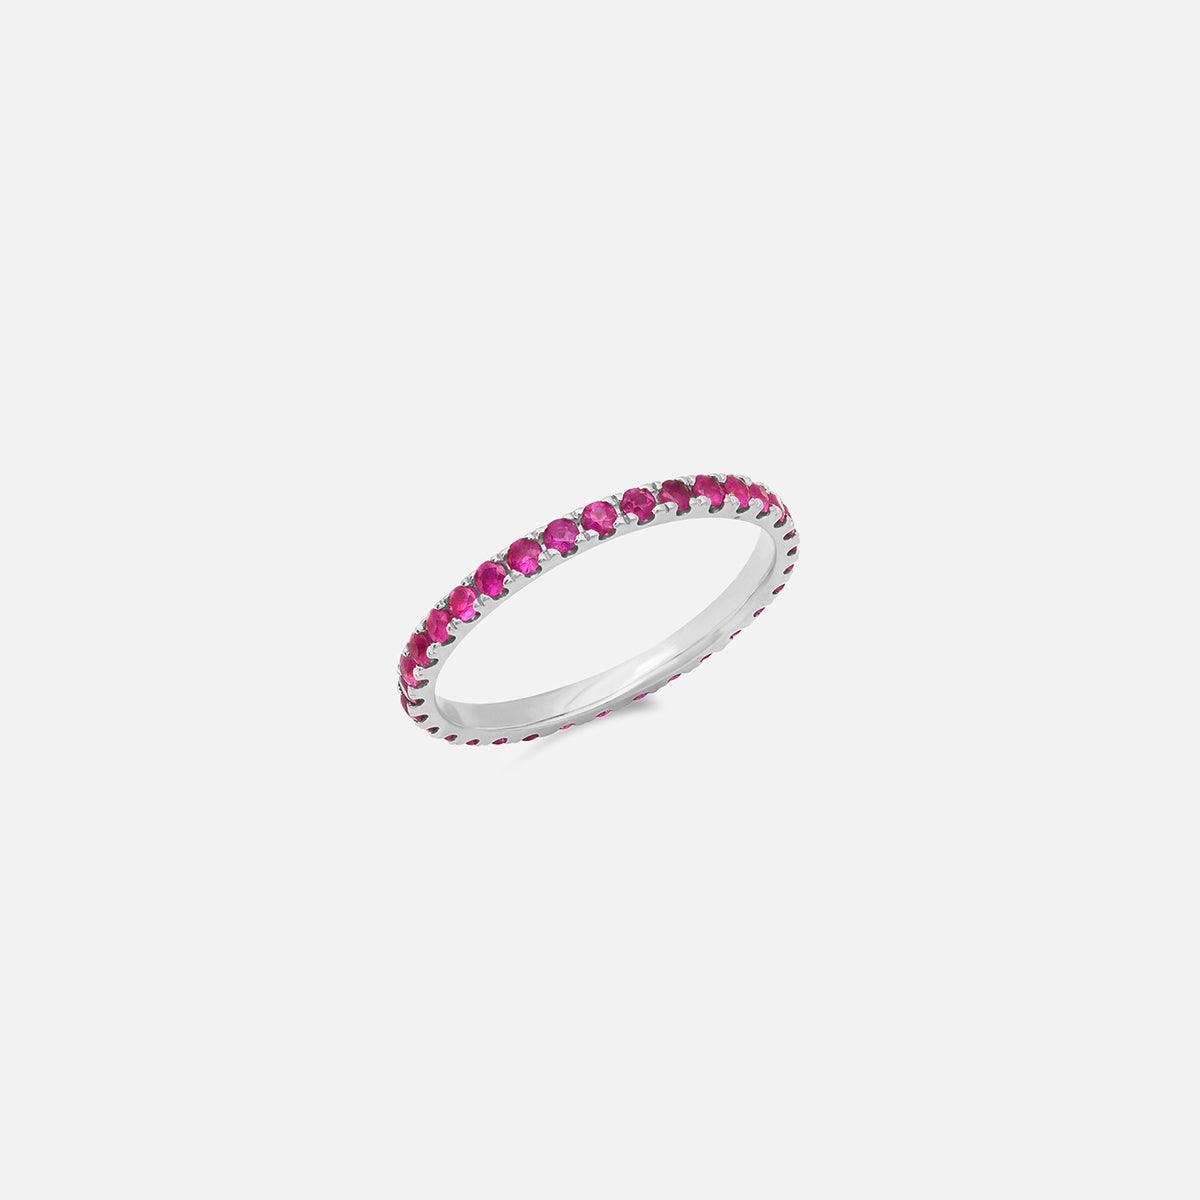 Eriness Standard Ruby Eternity Band - At Present Jewelry